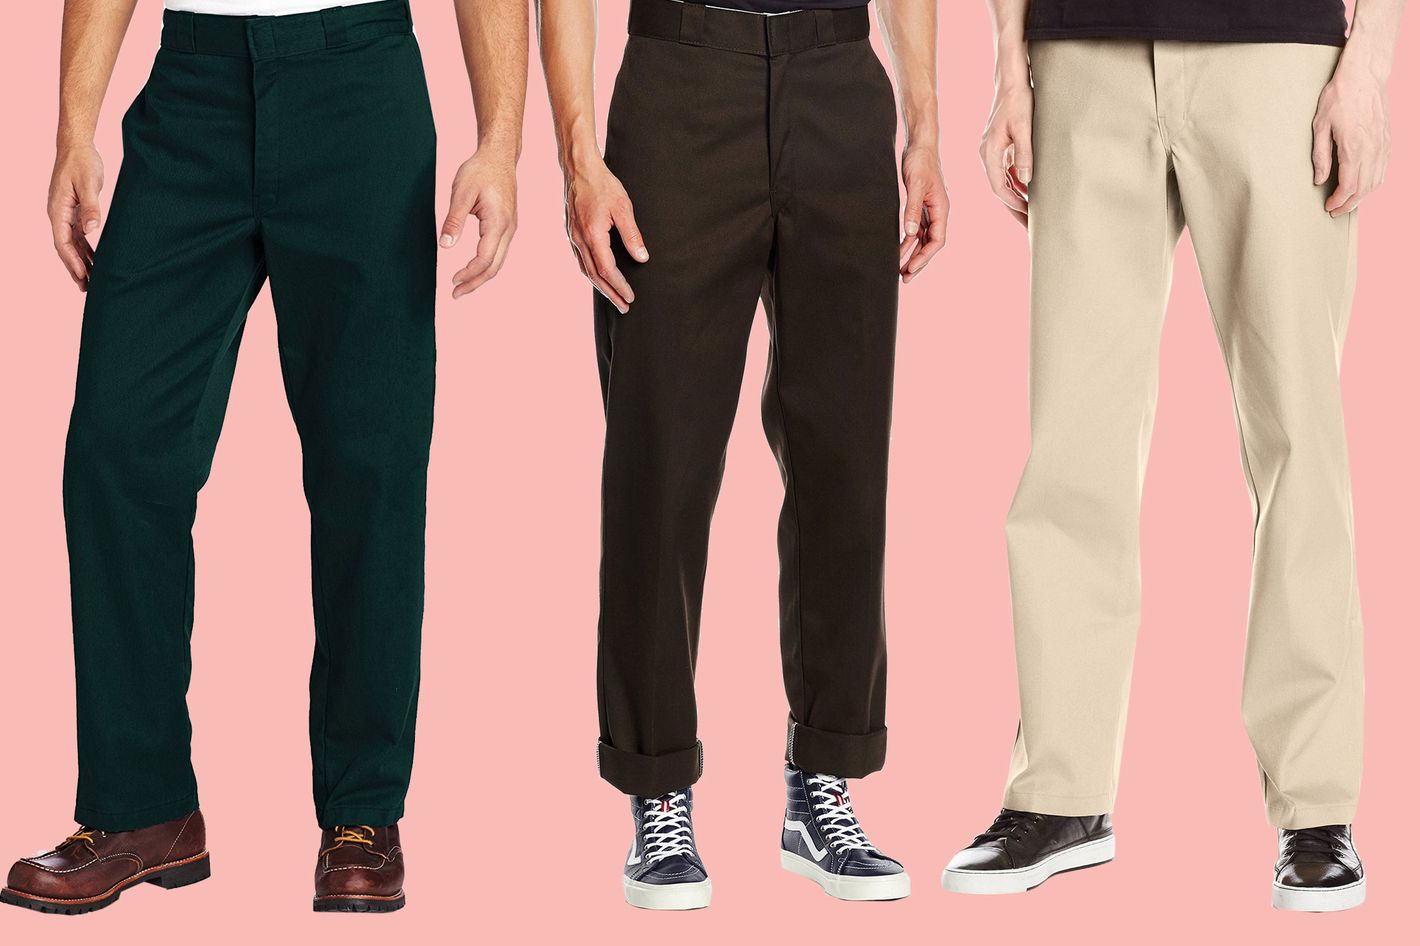 16 Pairs of Mens Fashion Dickies Pants on Amazon  The Strategist